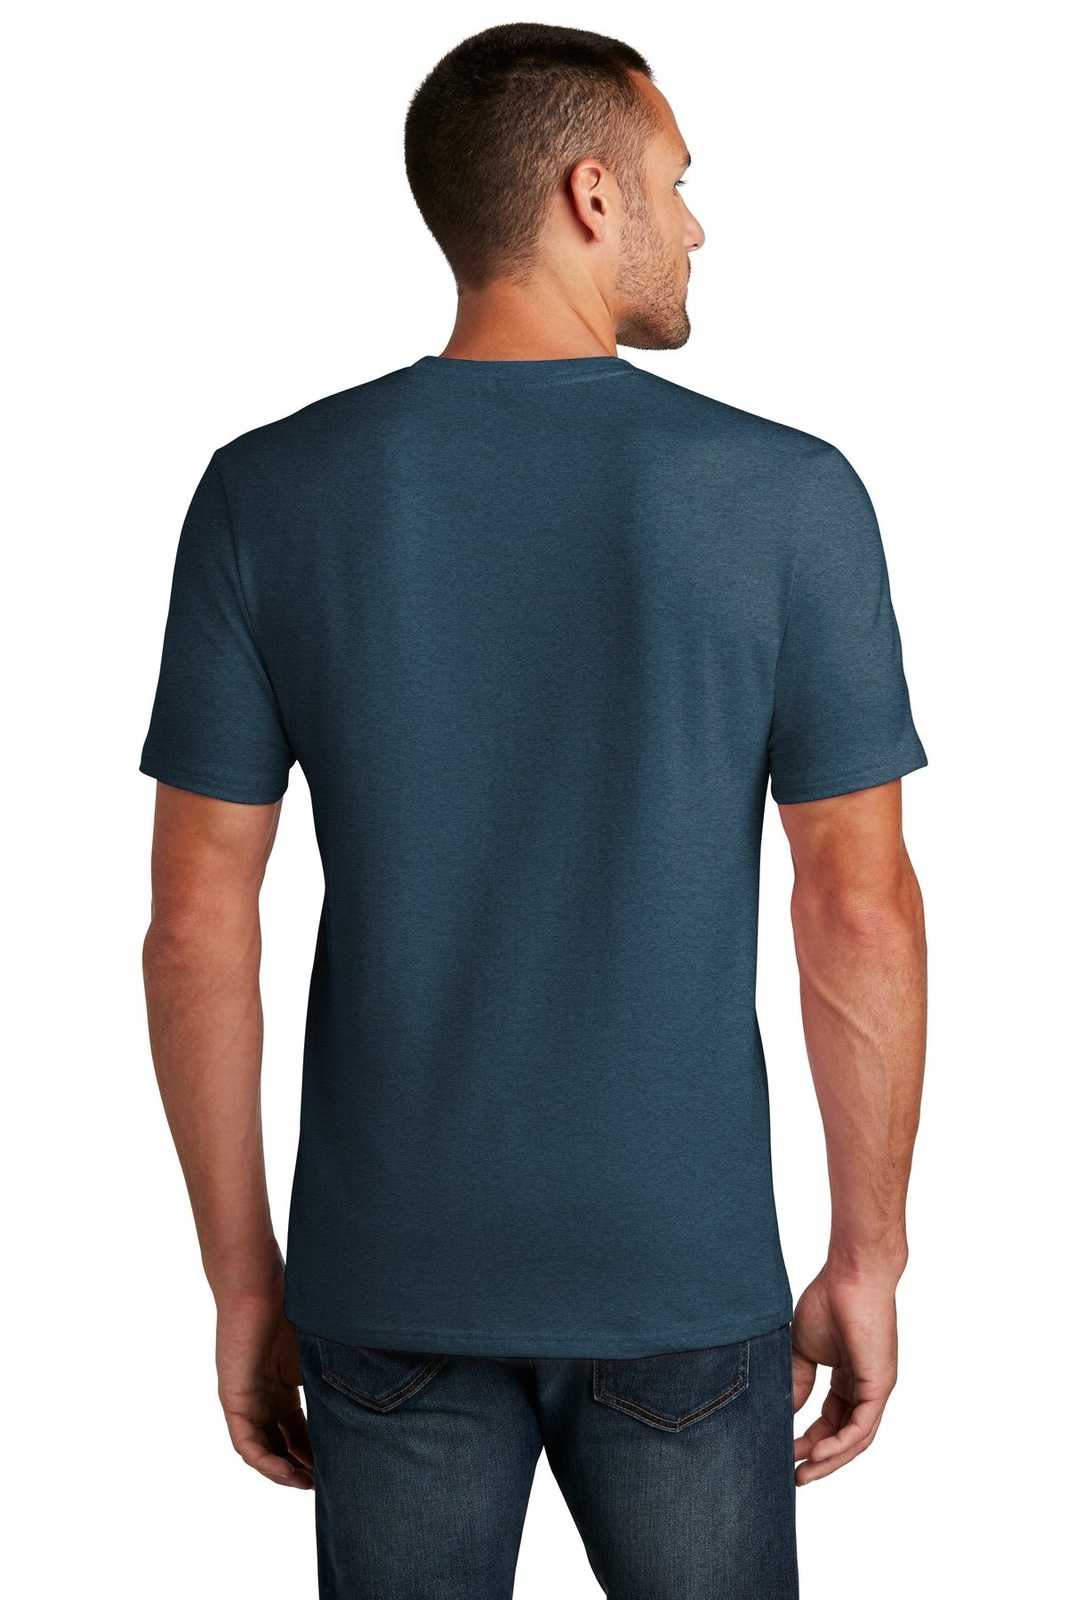 District DT7500 Flex Tee - Heathered Neptune Blue - HIT a Double - 1